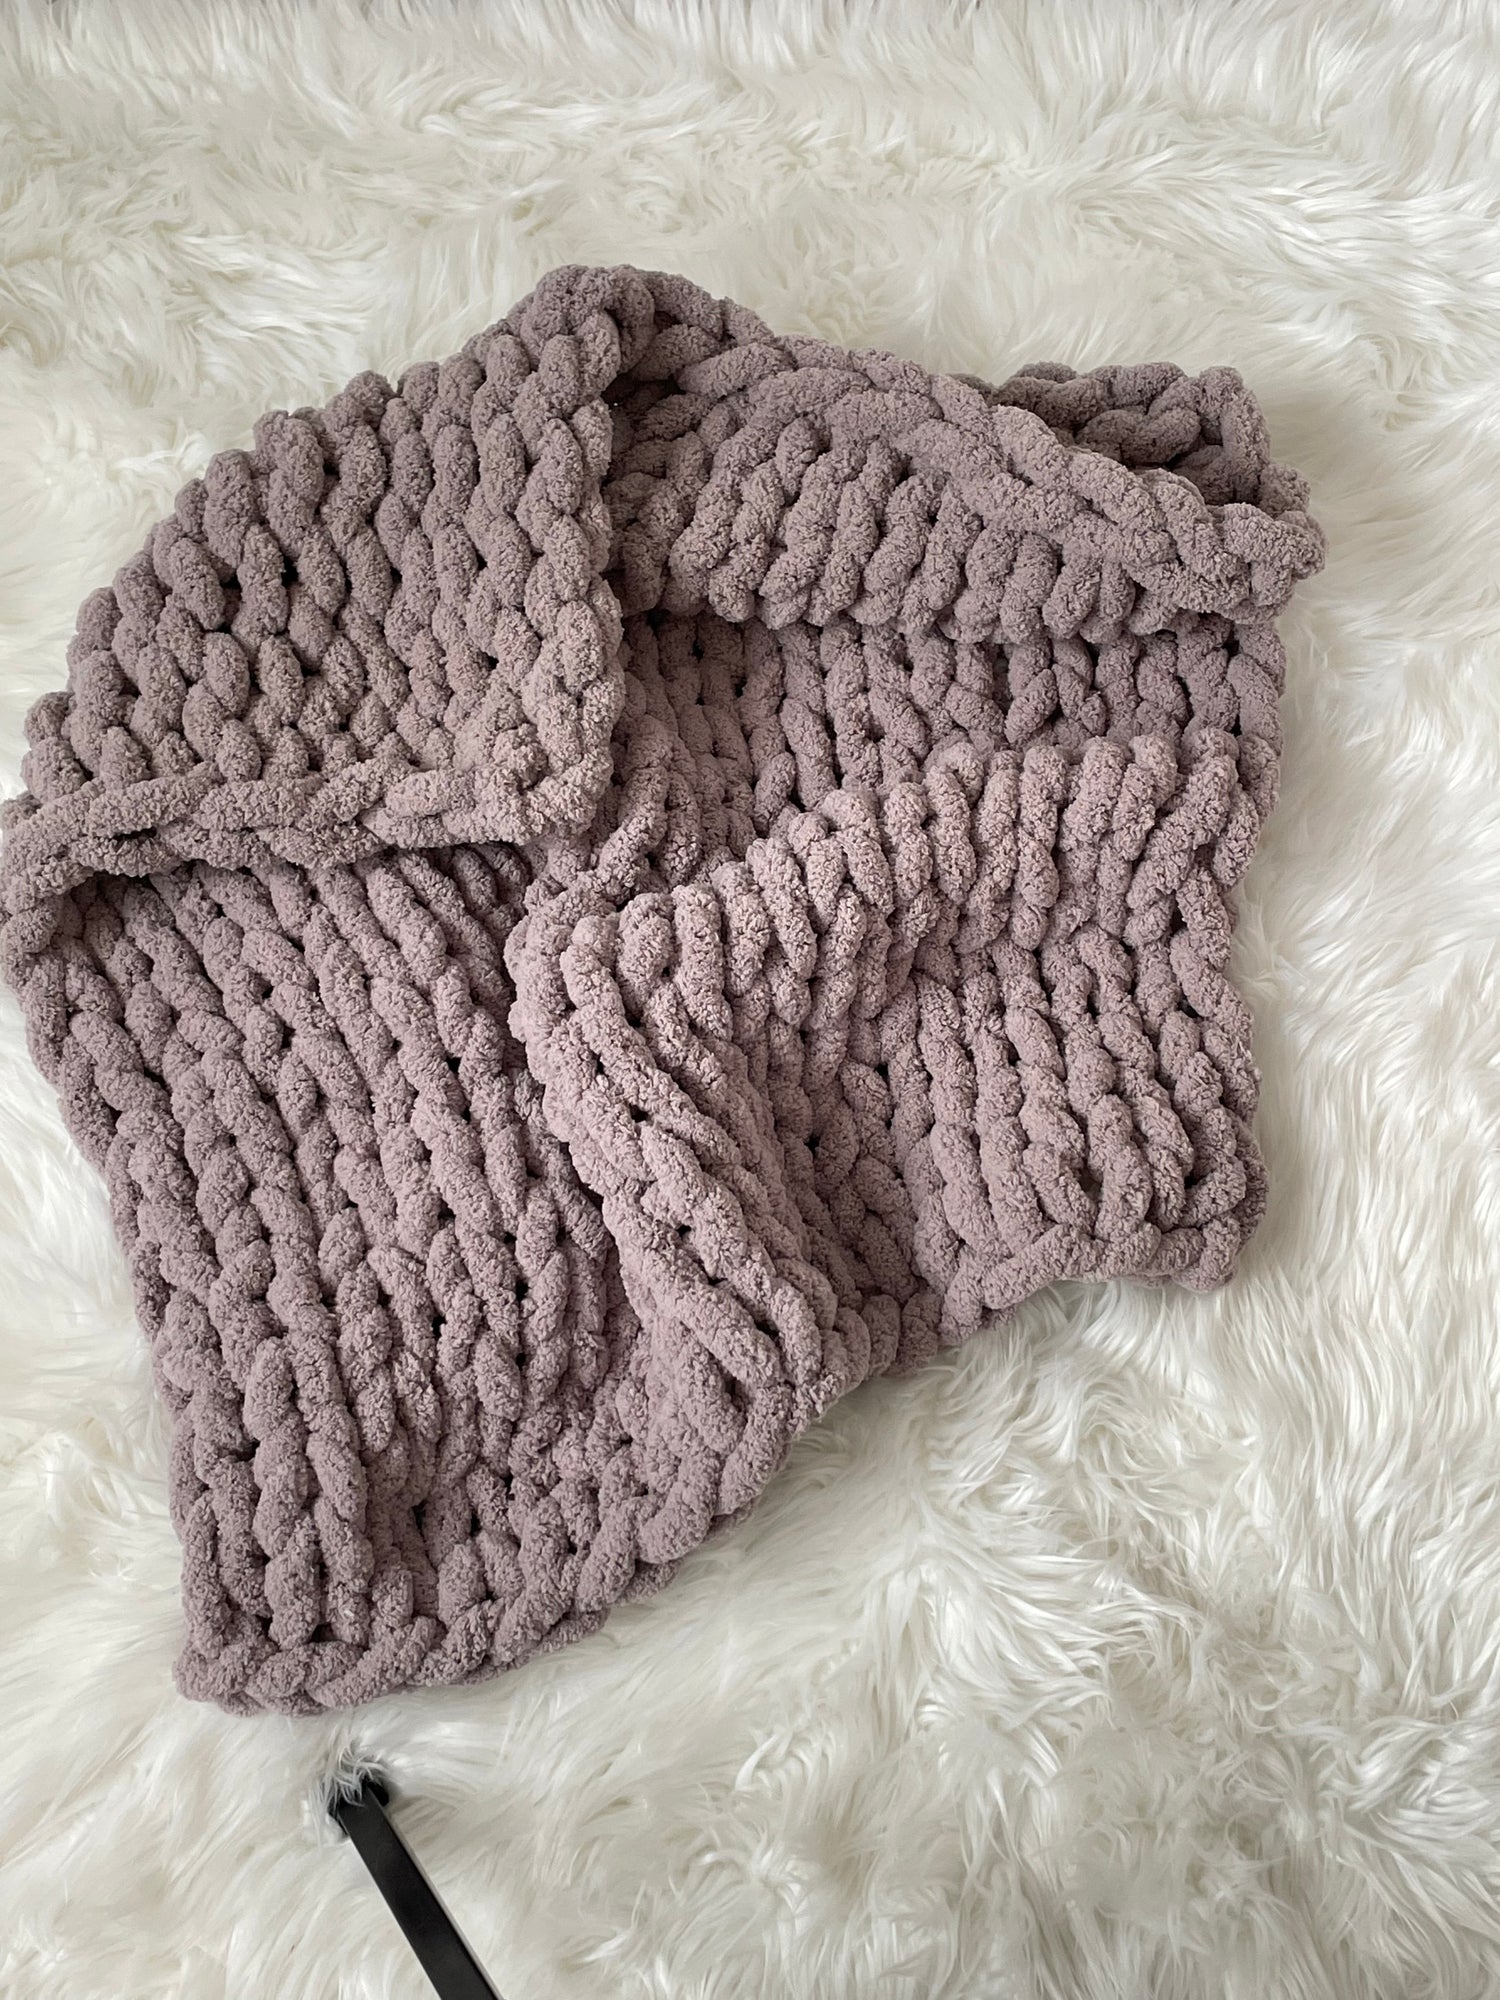 HAND KNIT A CHUNKY BLANKET/CABLE KNIT 